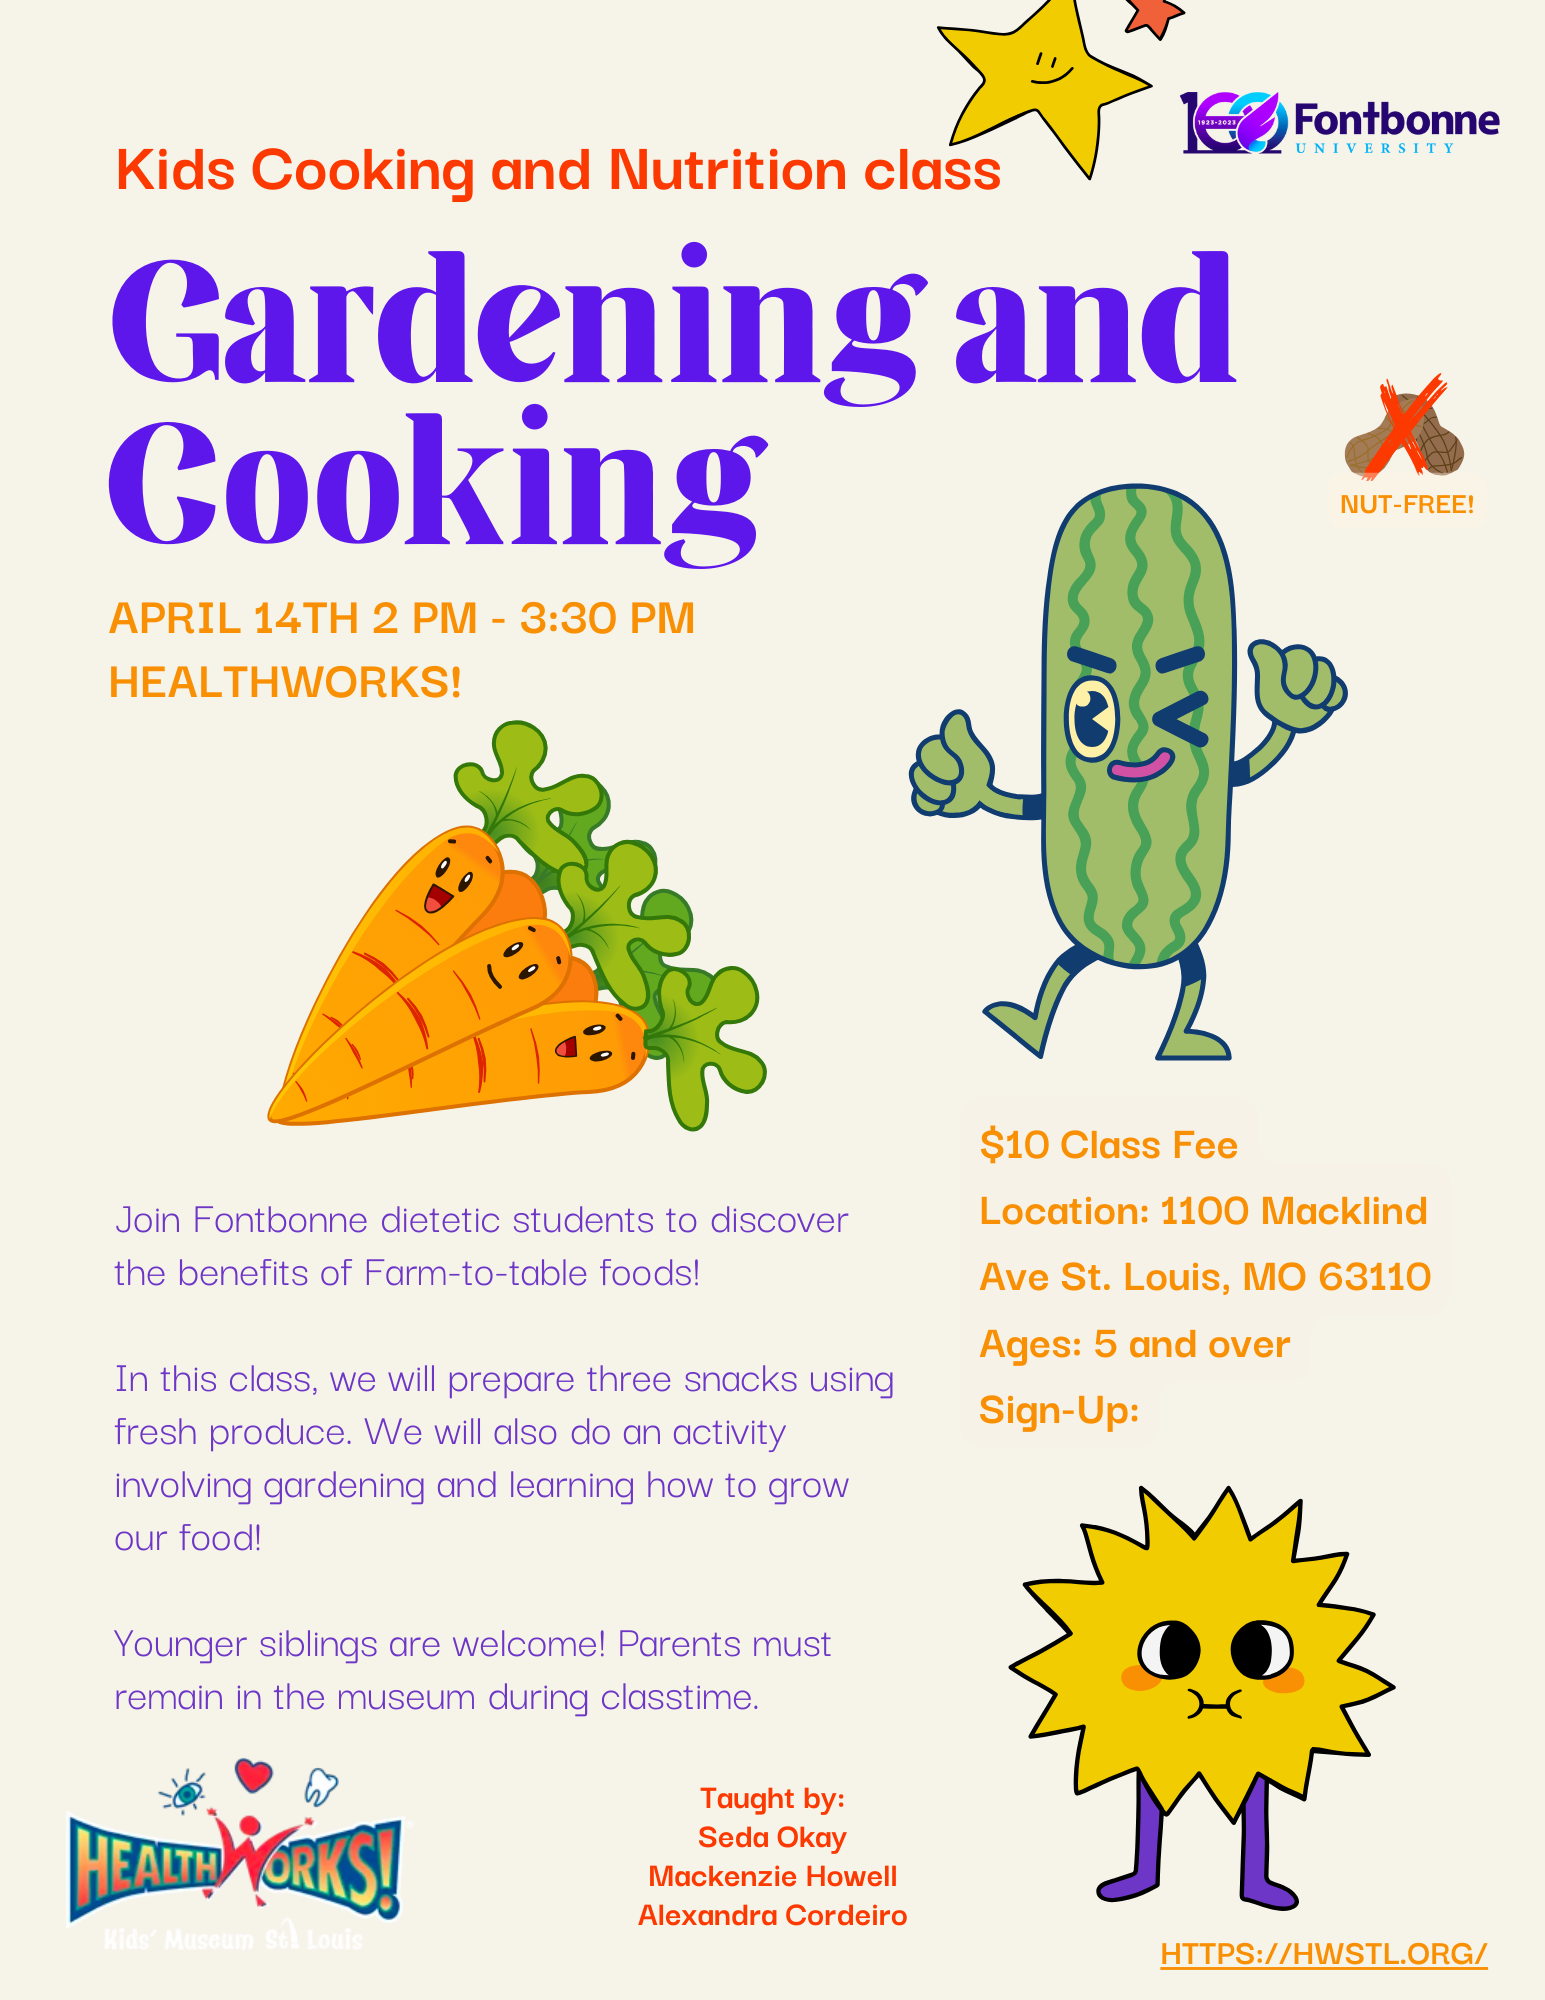 COOKING CLASS: Gardening and Cooking